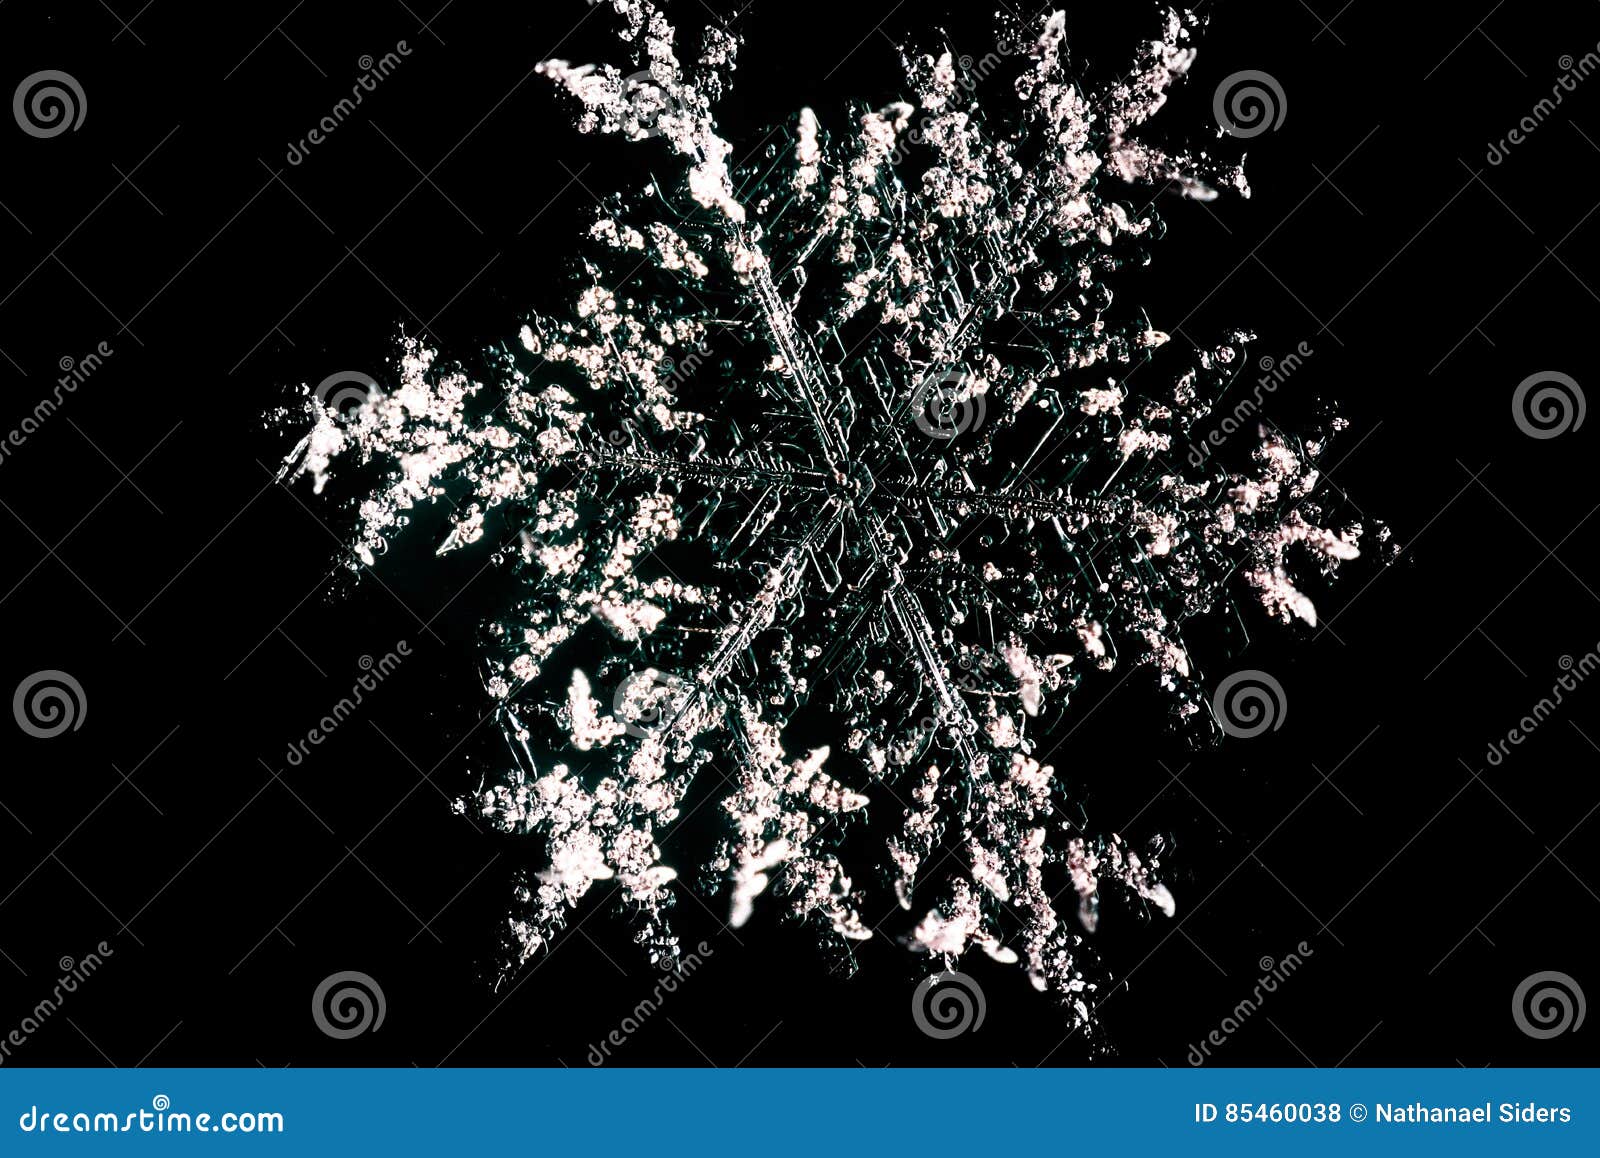 Snowflake With Black Background Stock Photo - Image of blizzard